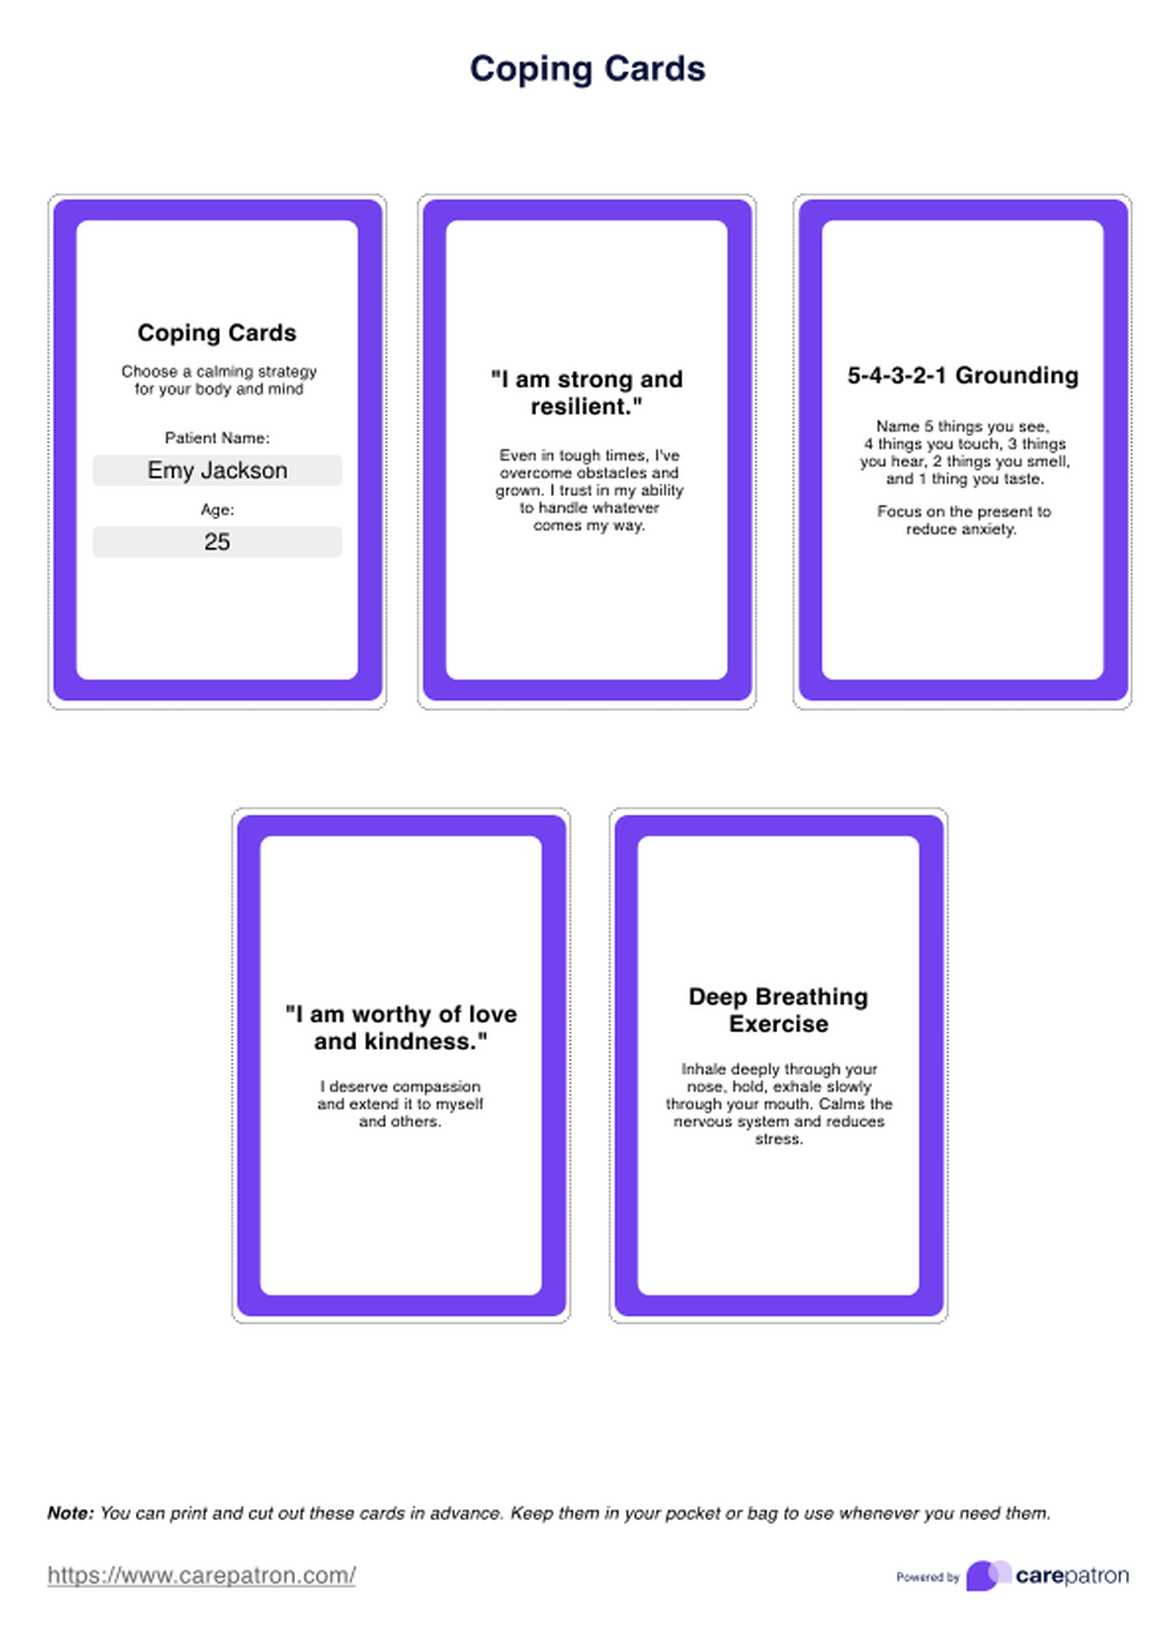 Coping Cards PDF Example